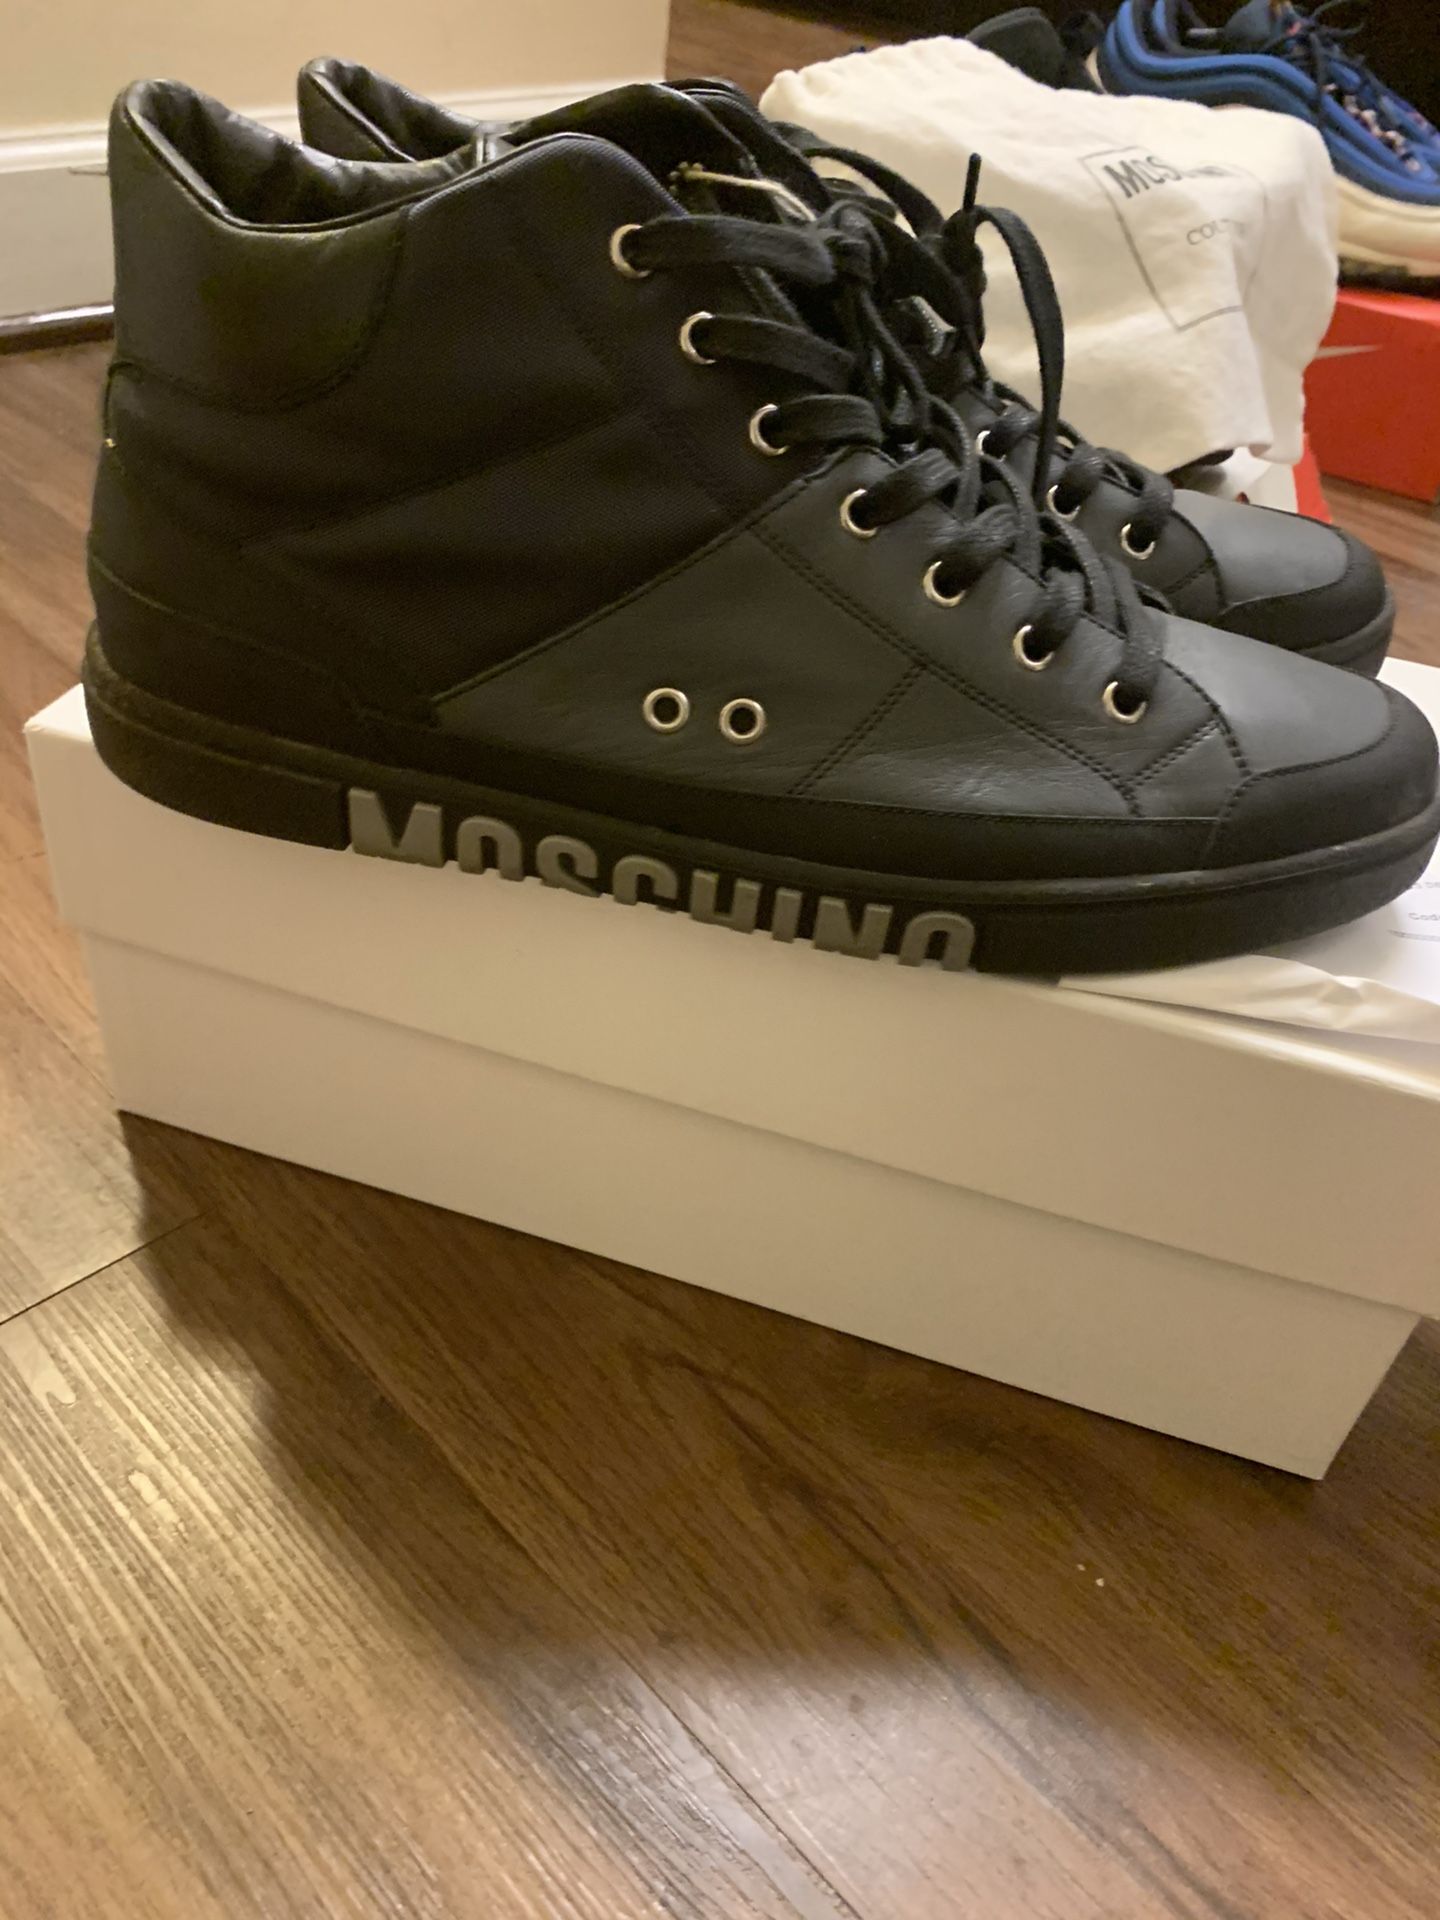 Moschino sneaker size 12us size 45 eu 100% authentic